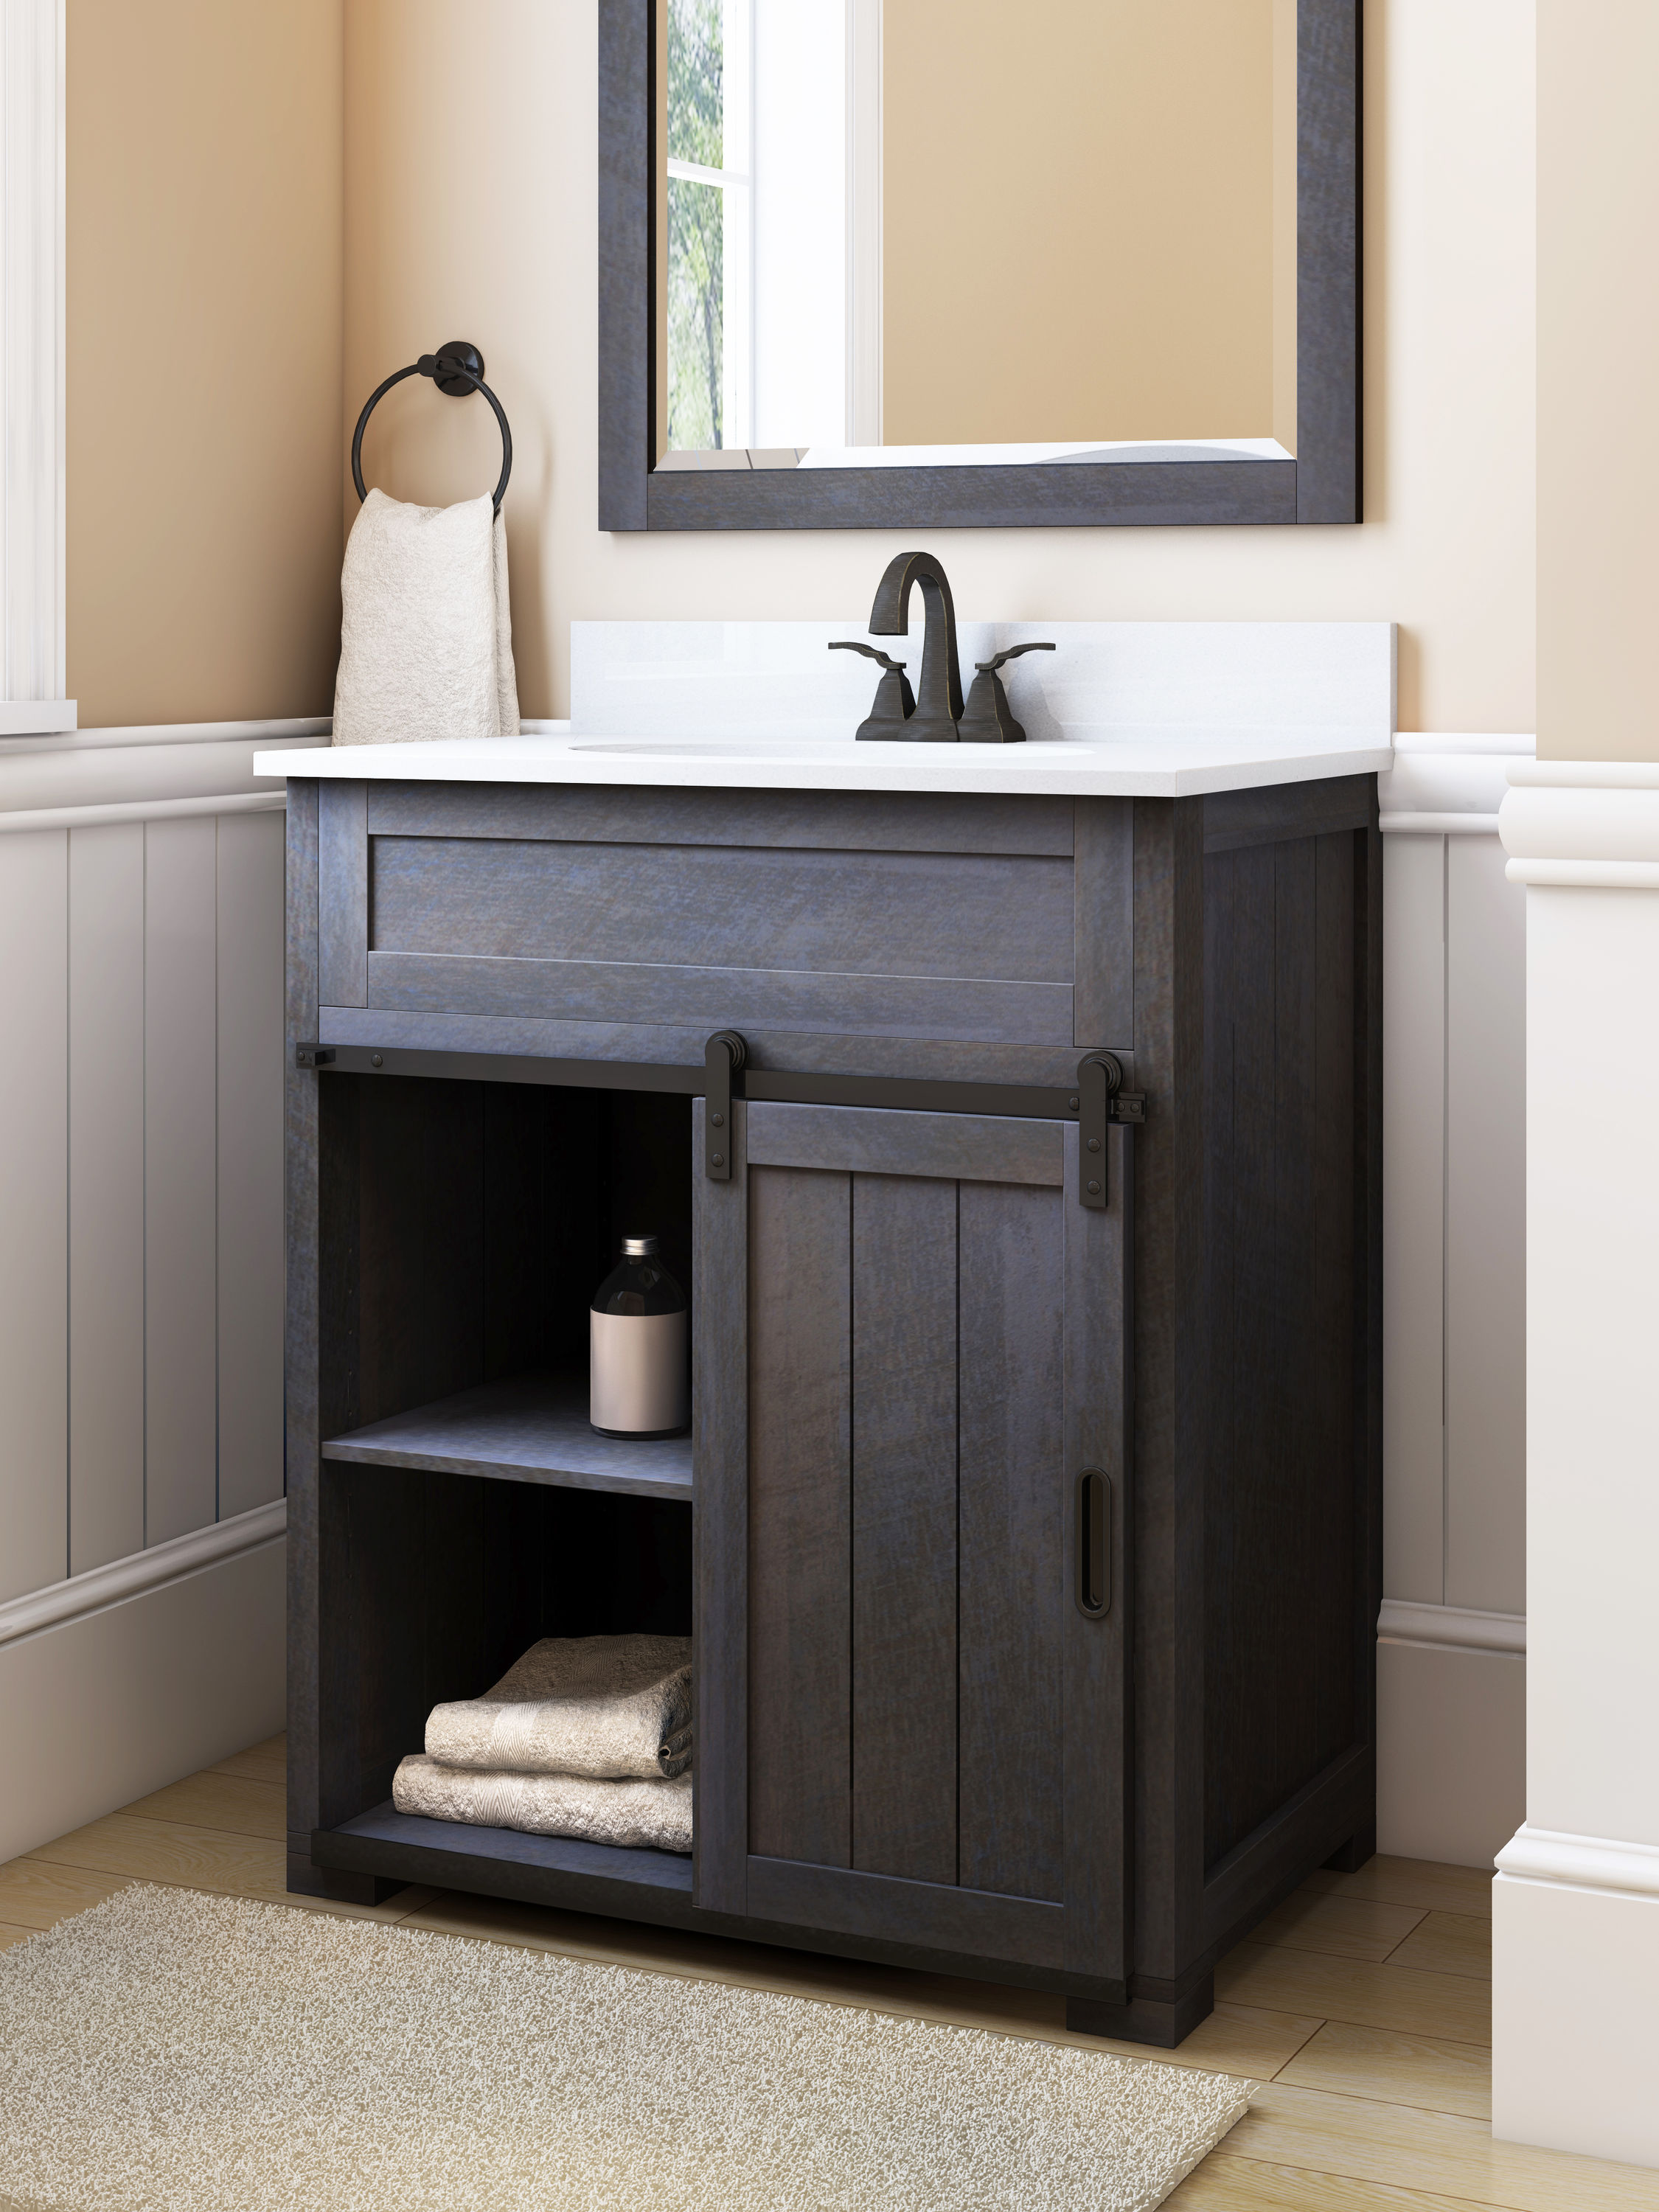 Style Selections Morriston 30 In Distressed Java Undermount Single Sink Bathroom Vanity With White Engineered Stone Top The Vanities Tops Department At Com - Bathroom Vanity Sink With Drawers